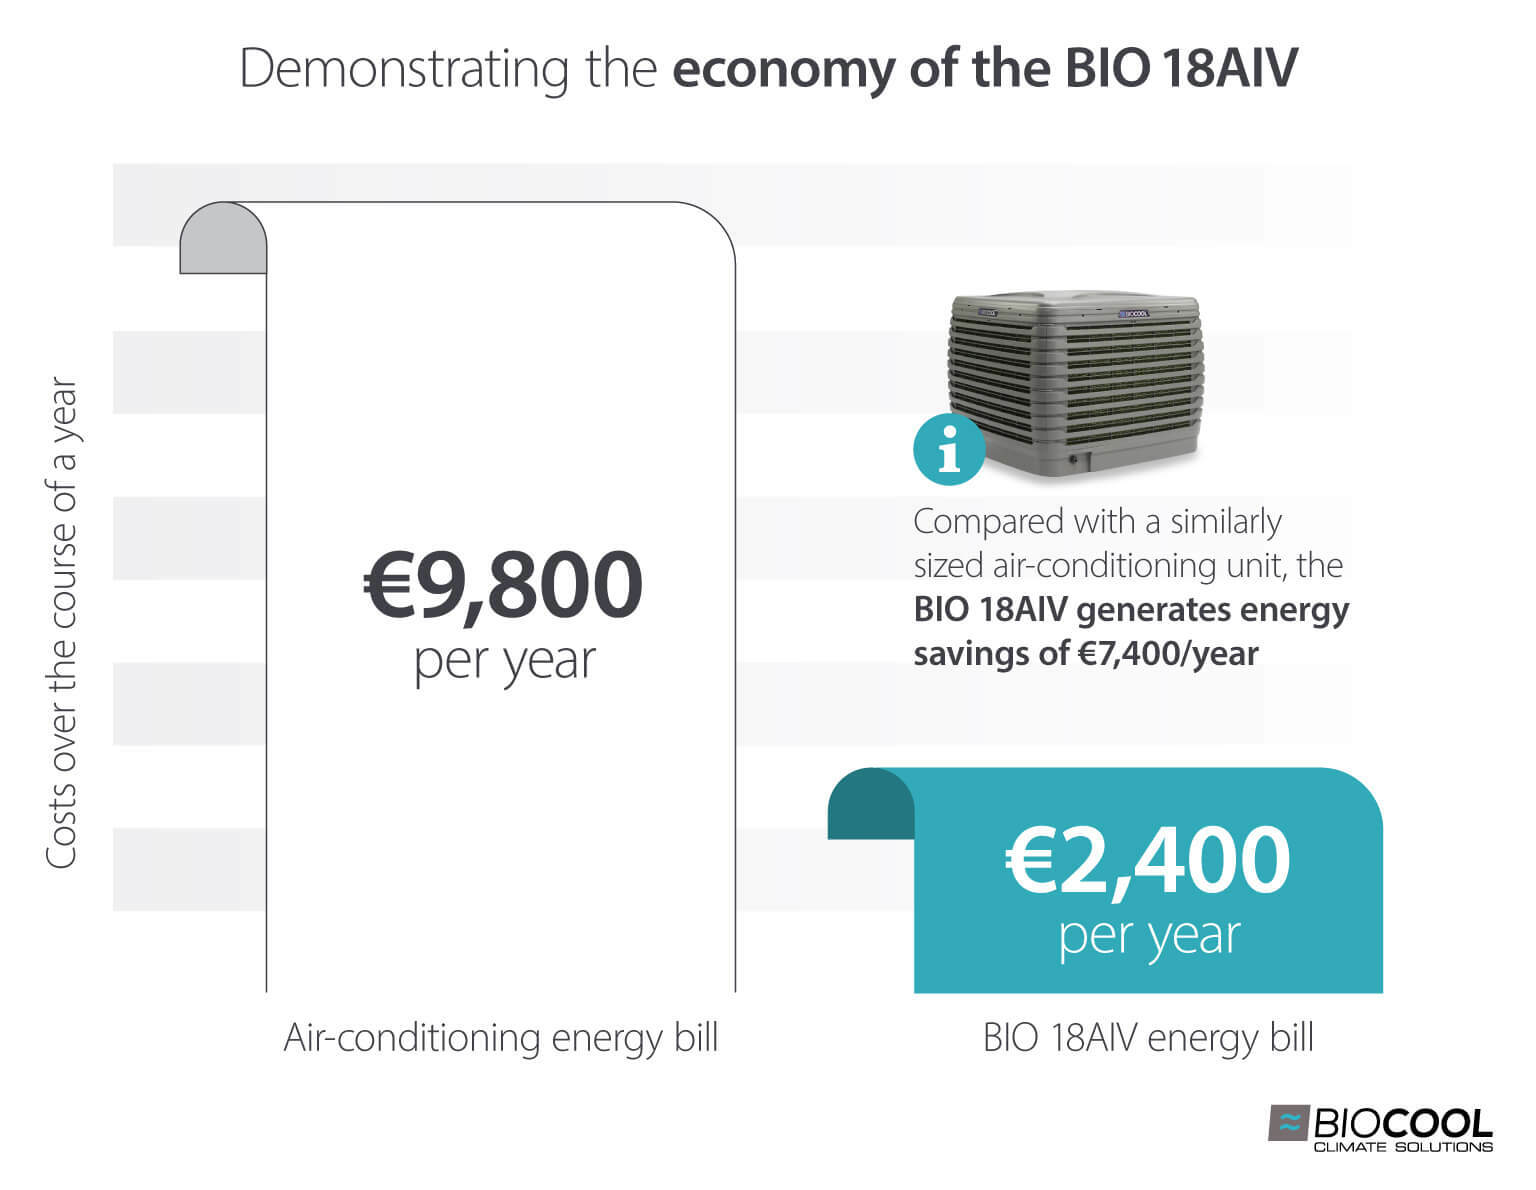 Evaporative cooling energy cost savings compared to air conditioning at €2,400 vs €9,800 per year - Biocool infographic image